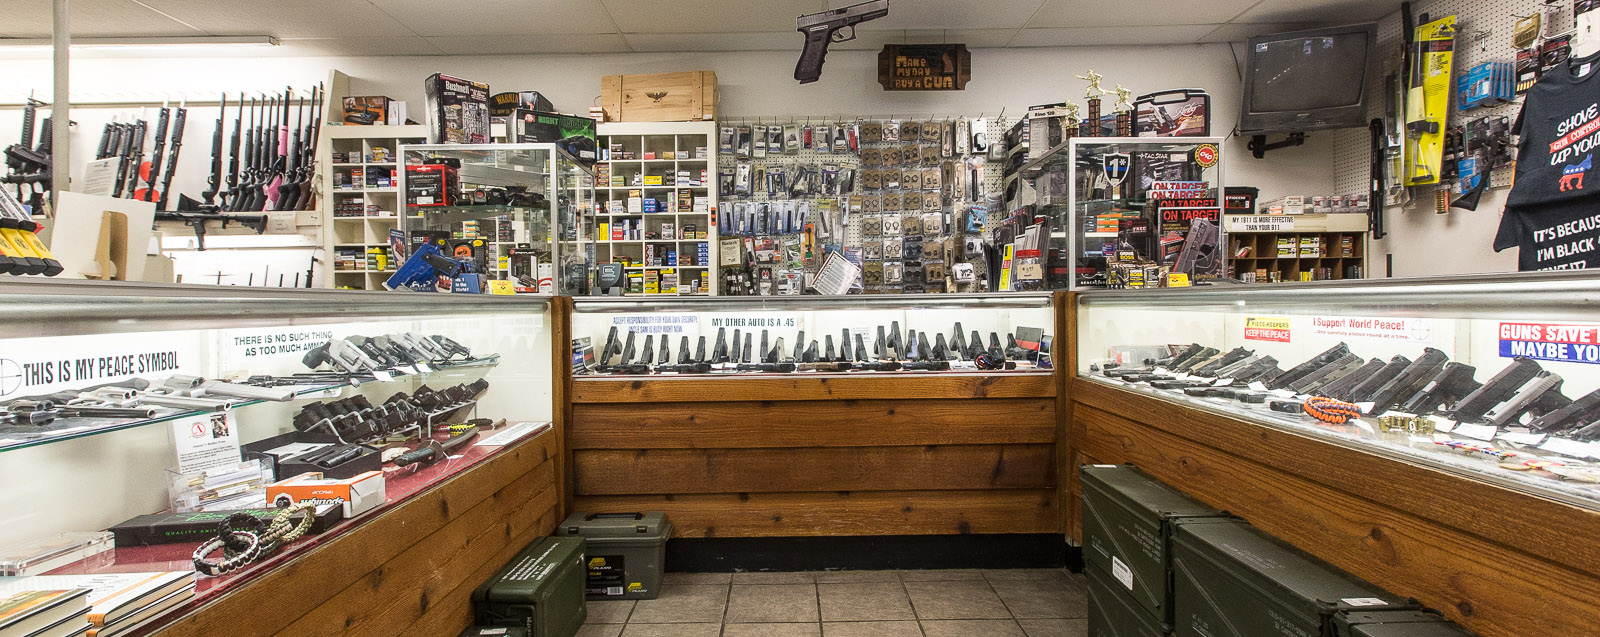 Featured image for “Profitable Pawn Shop”